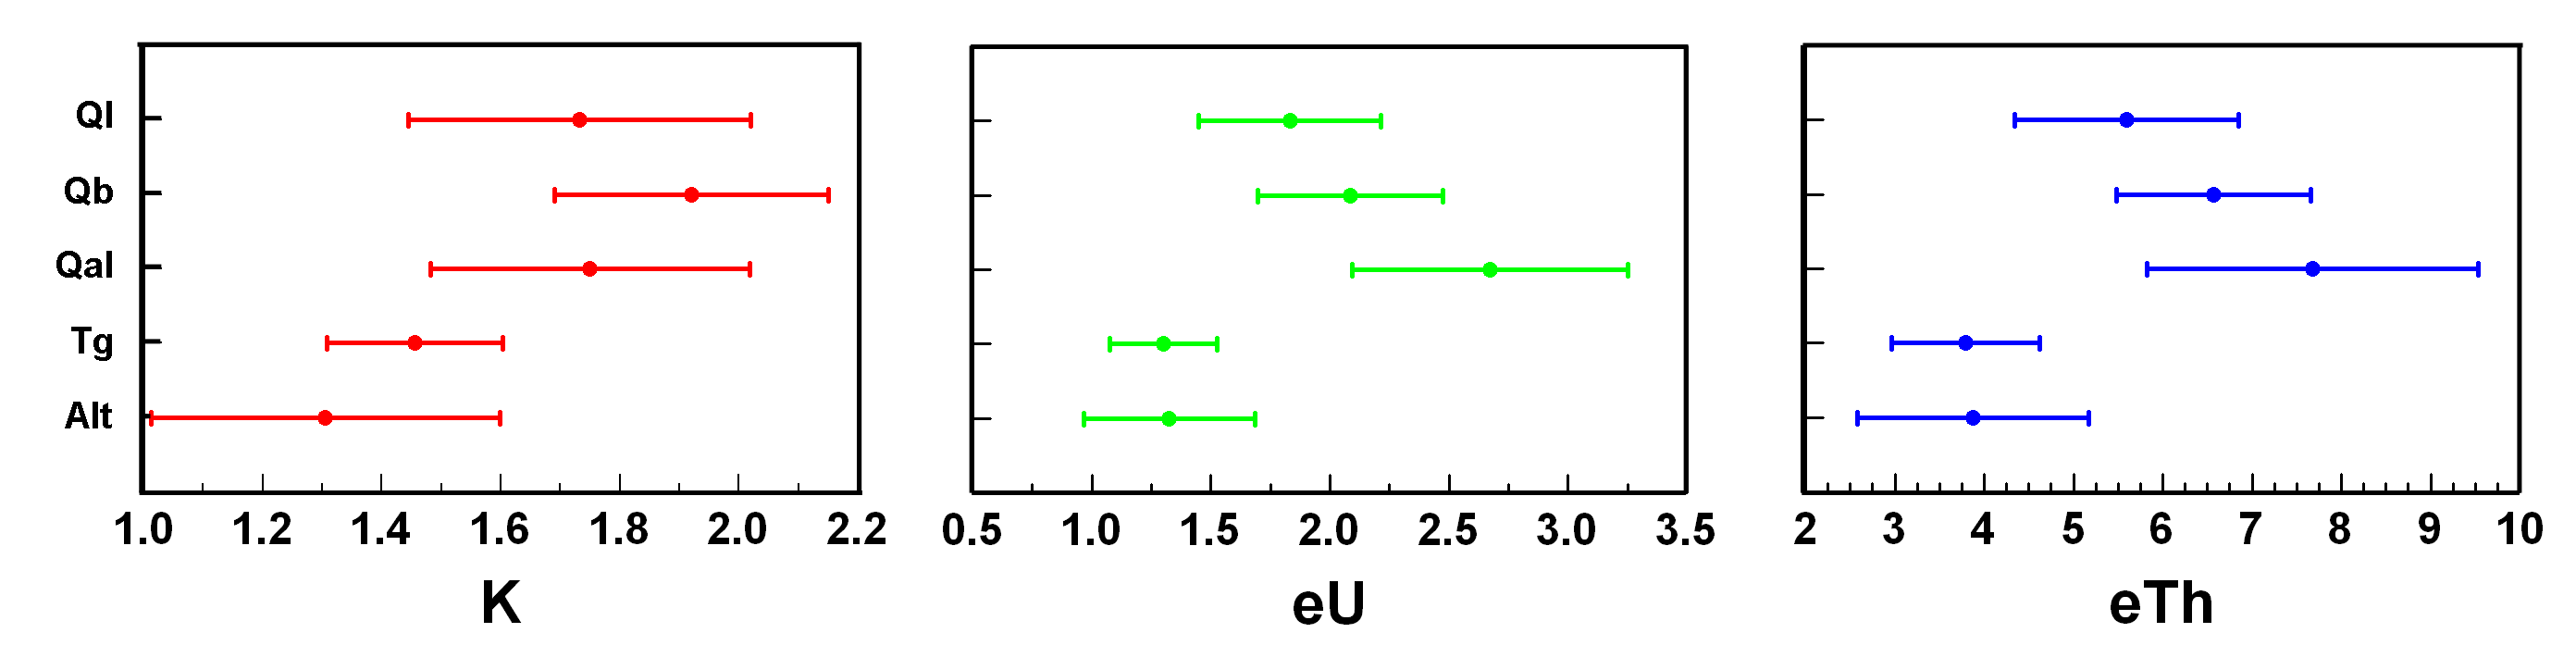 Image showing sample group mean values and standard deviatoins.